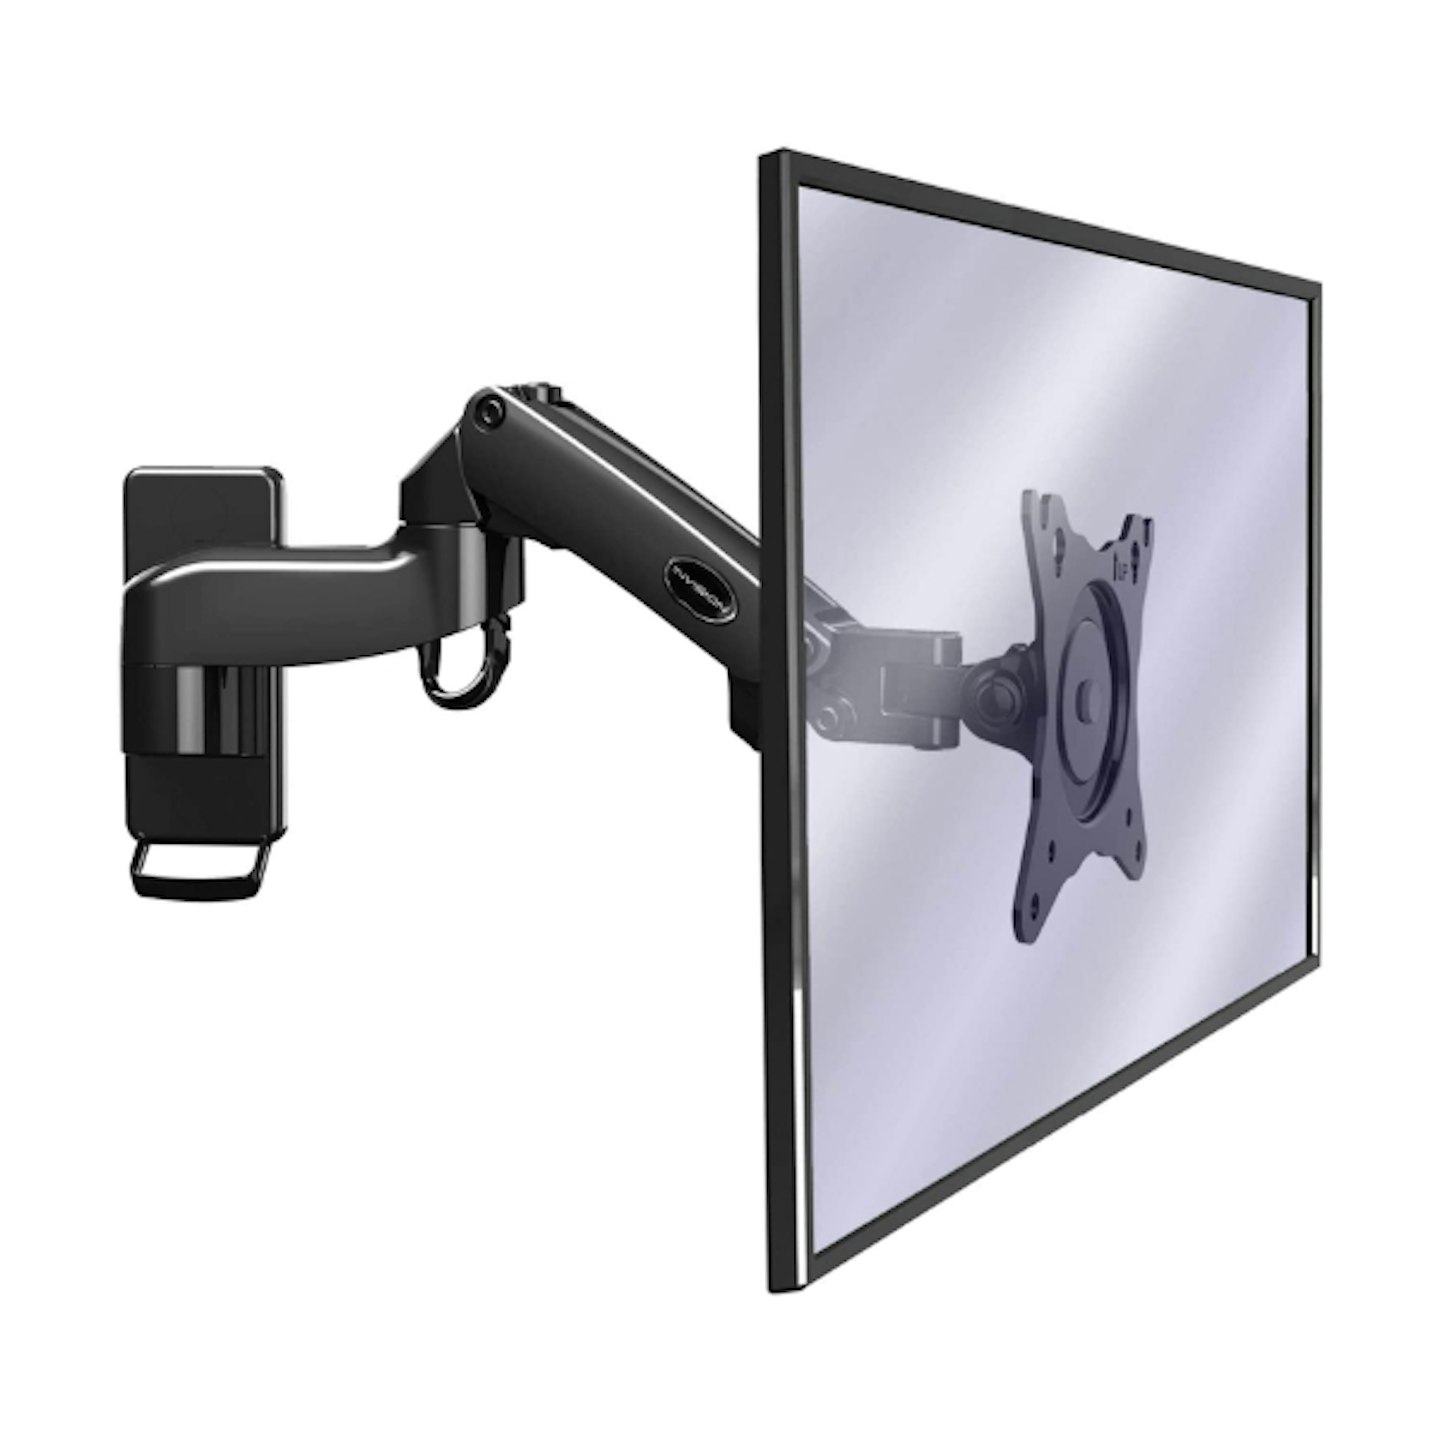 Invision Monitor Wall Mount Bracket